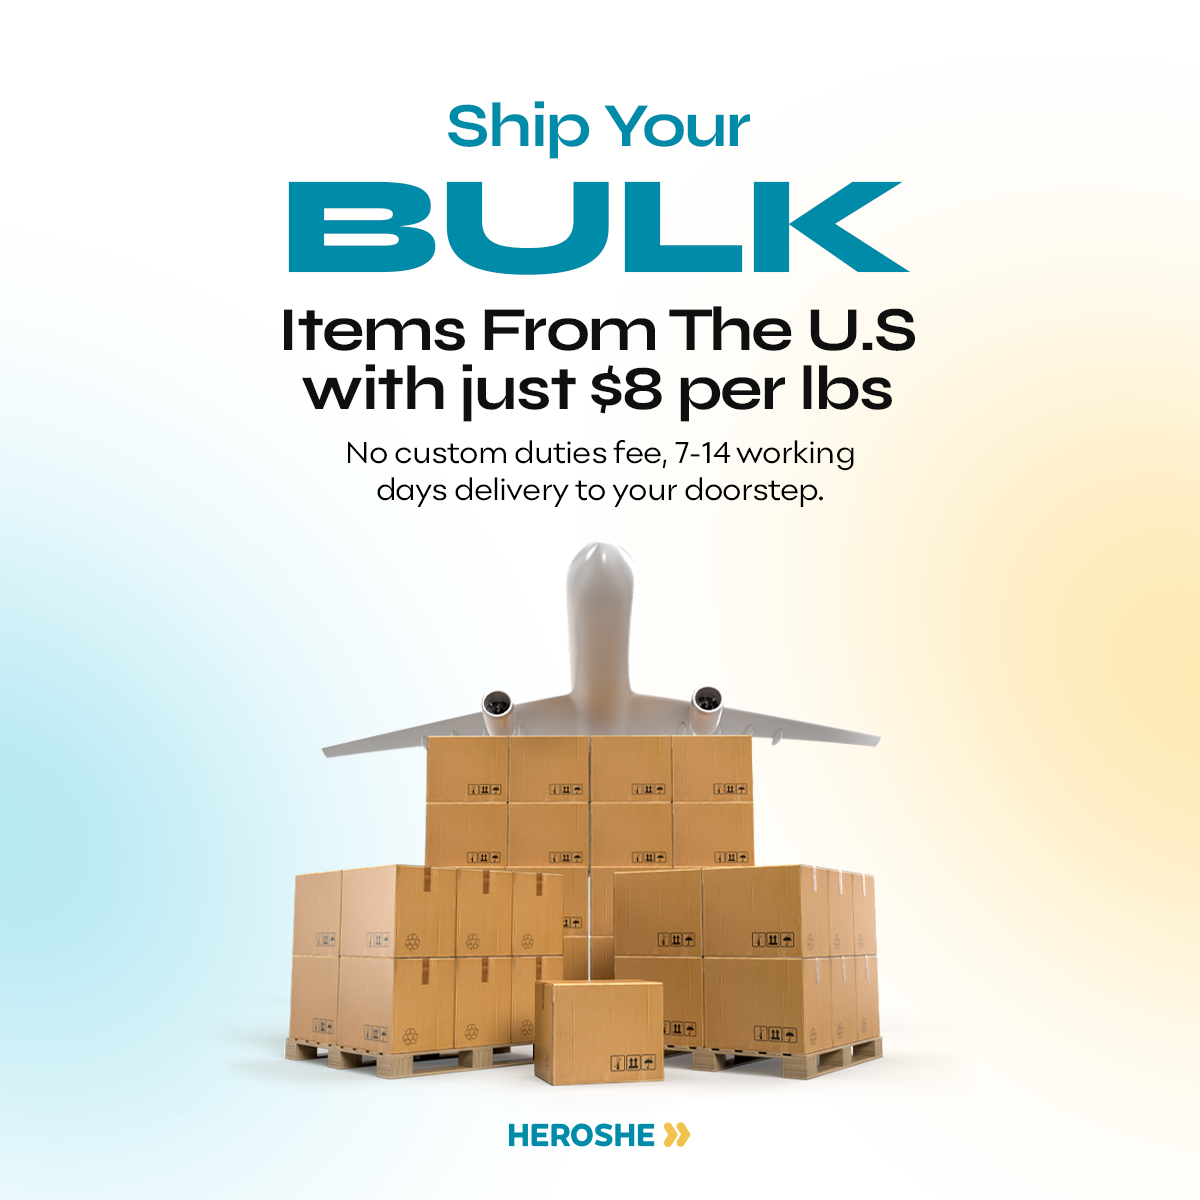 ship your bulk items from the US with Heroshe in 7-14 working days